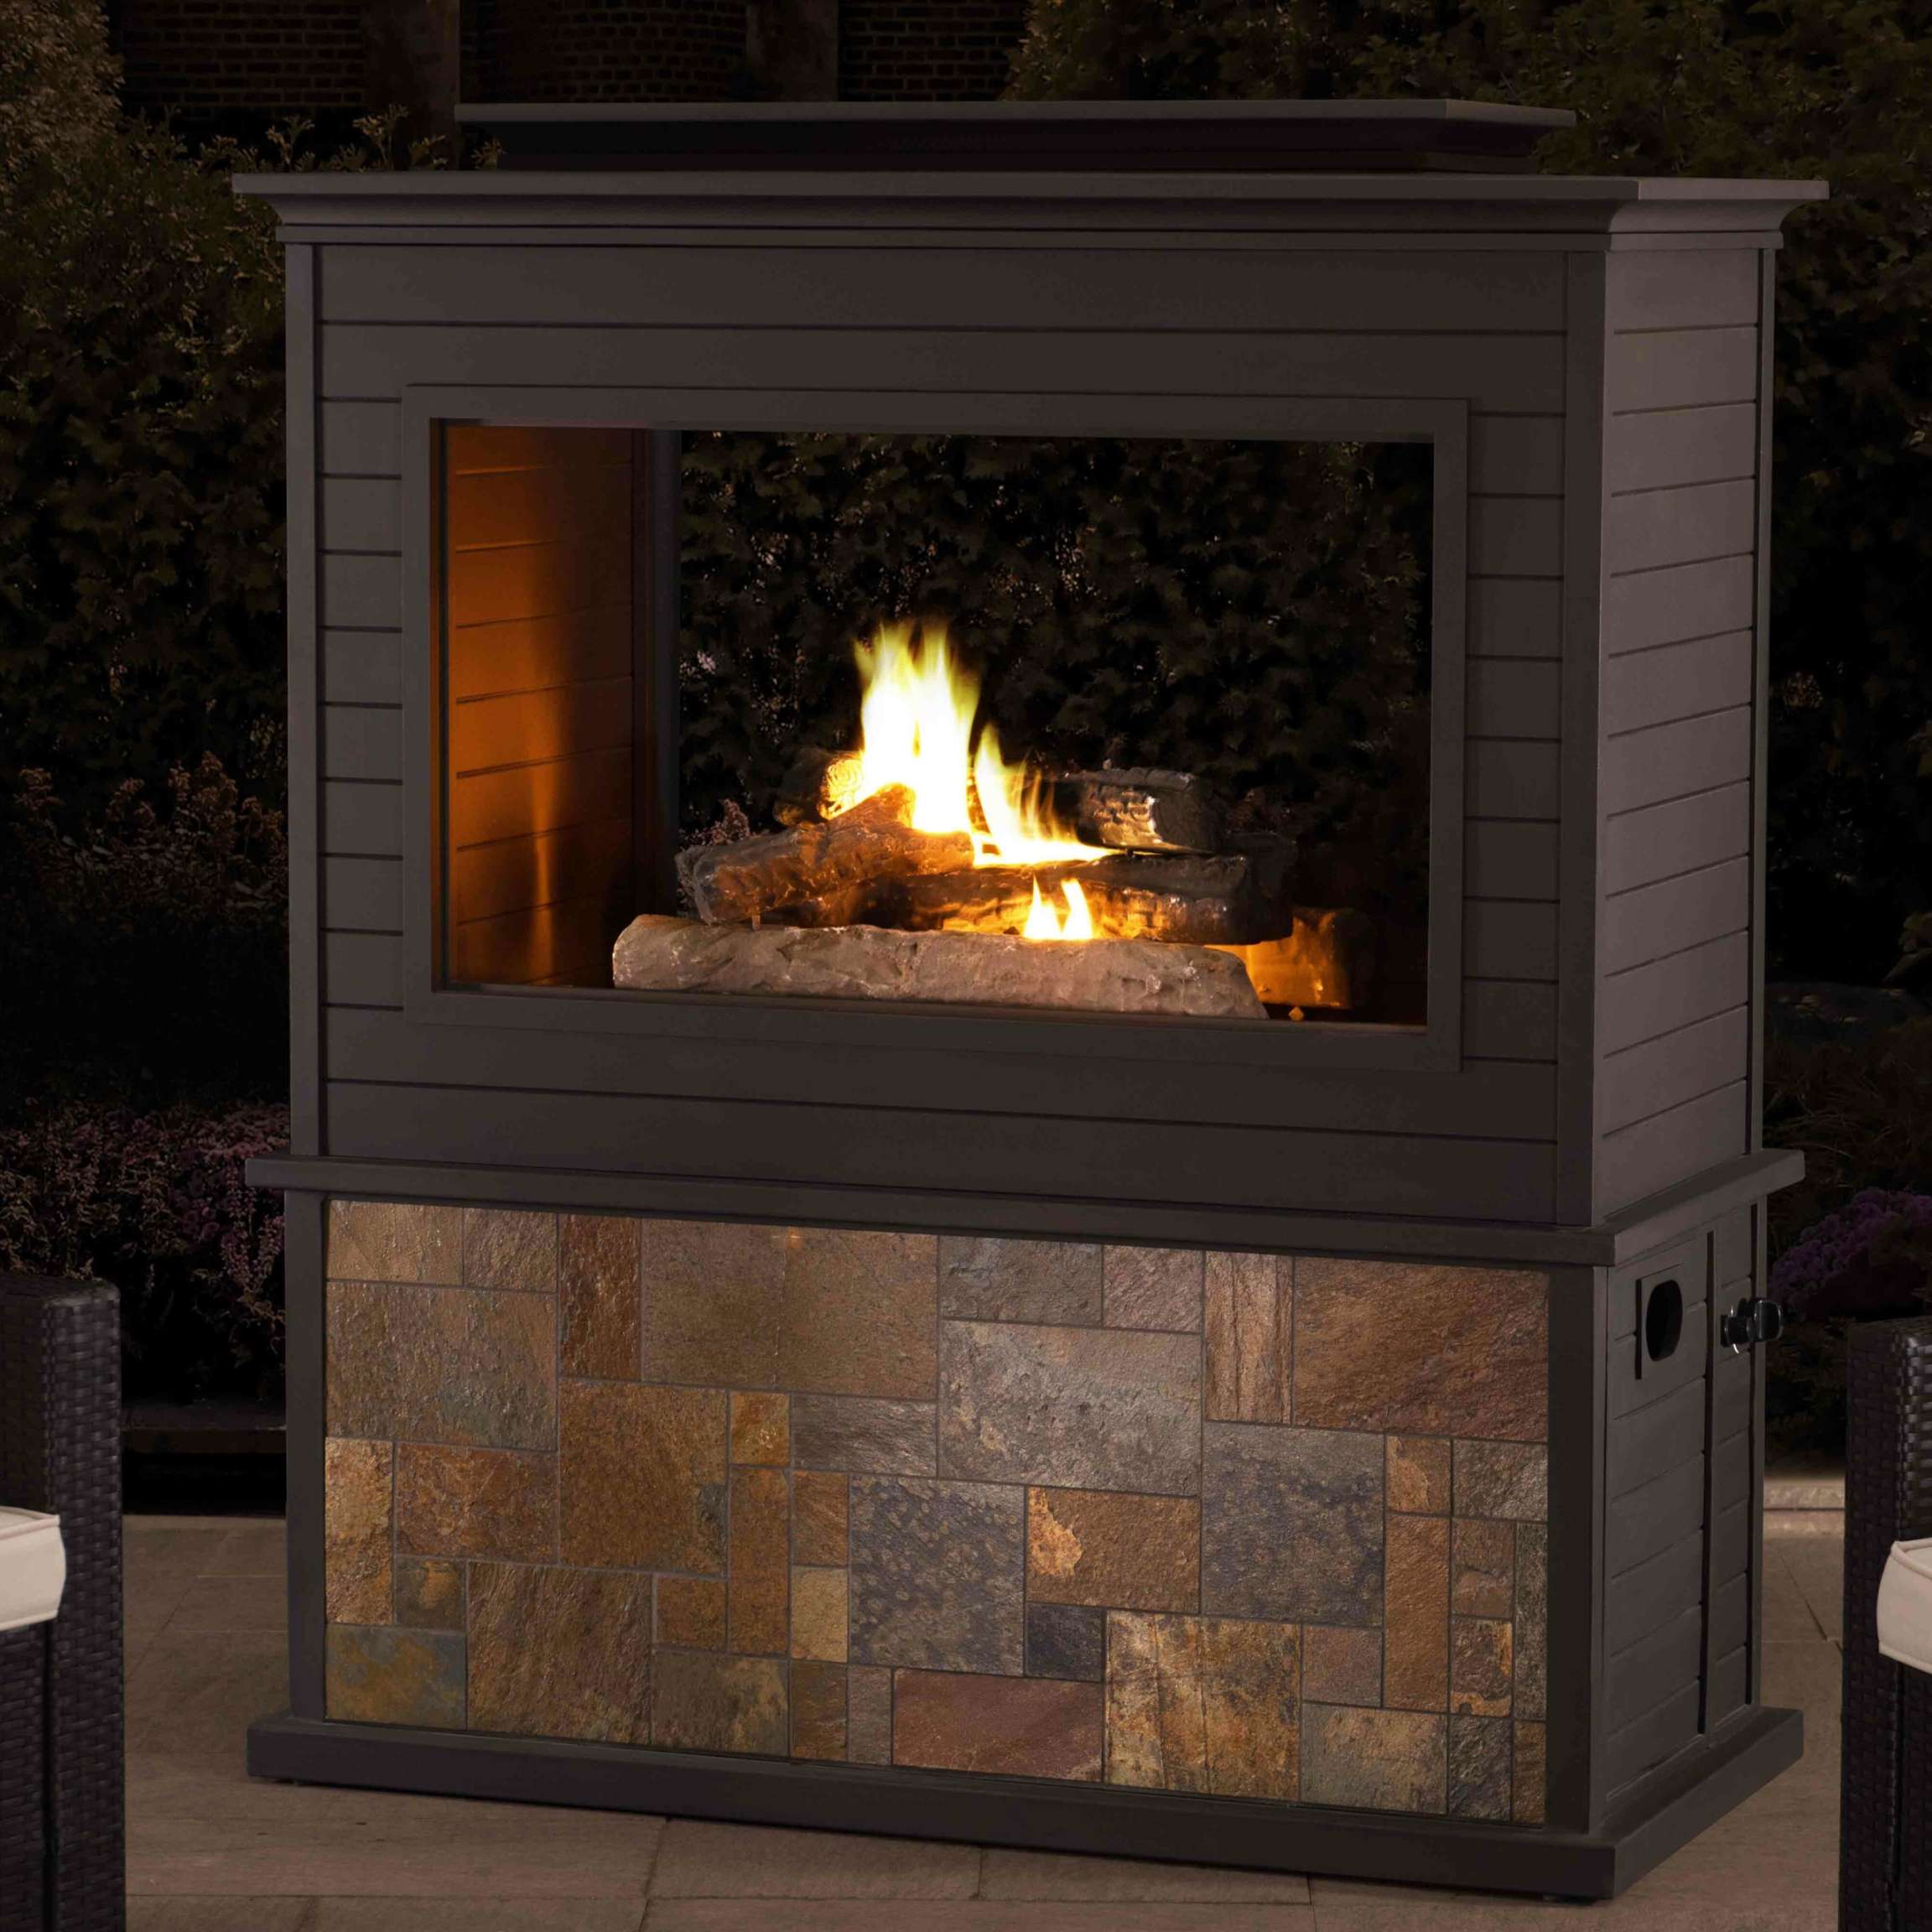 Outdoor Electric Fireplace - VisualHunt